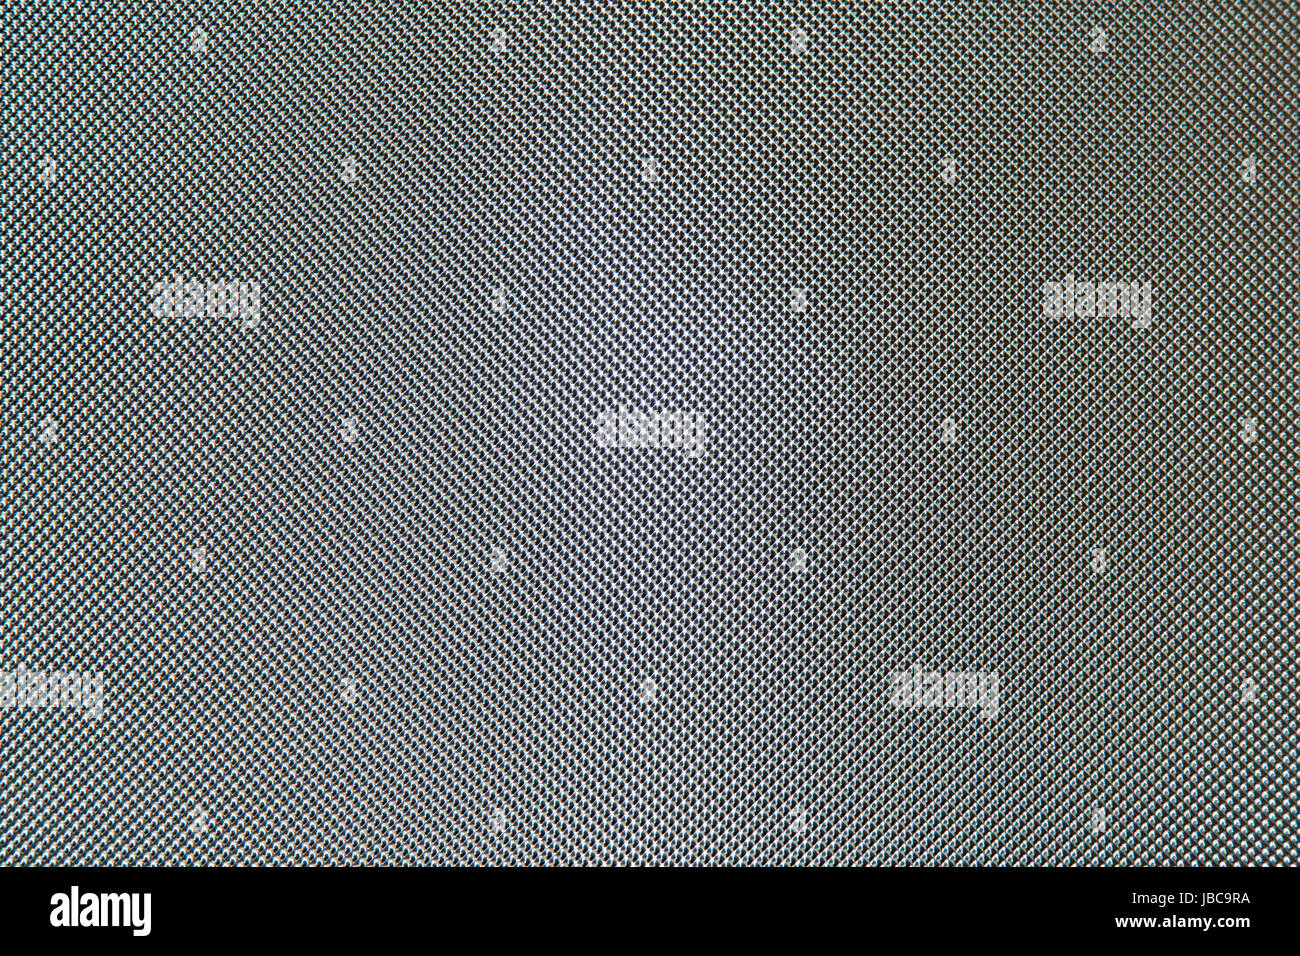 Background of metal with repetitive pattern Stock Photo